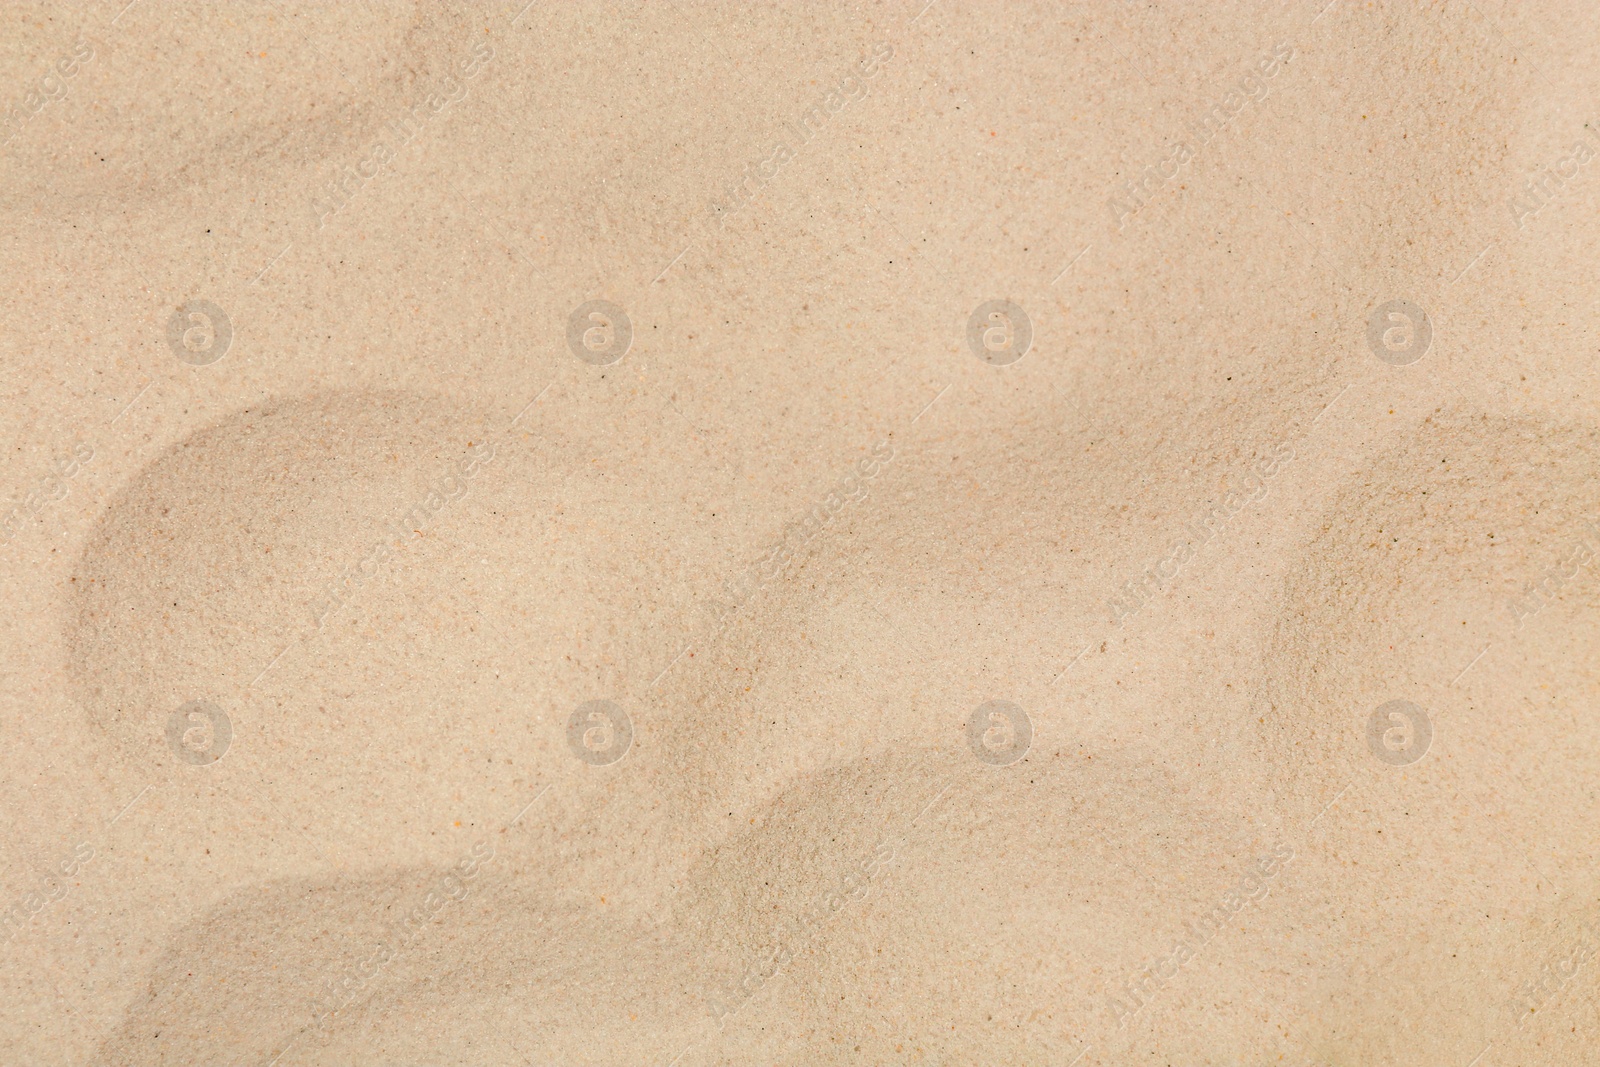 Photo of Dry beach sand as background, top view